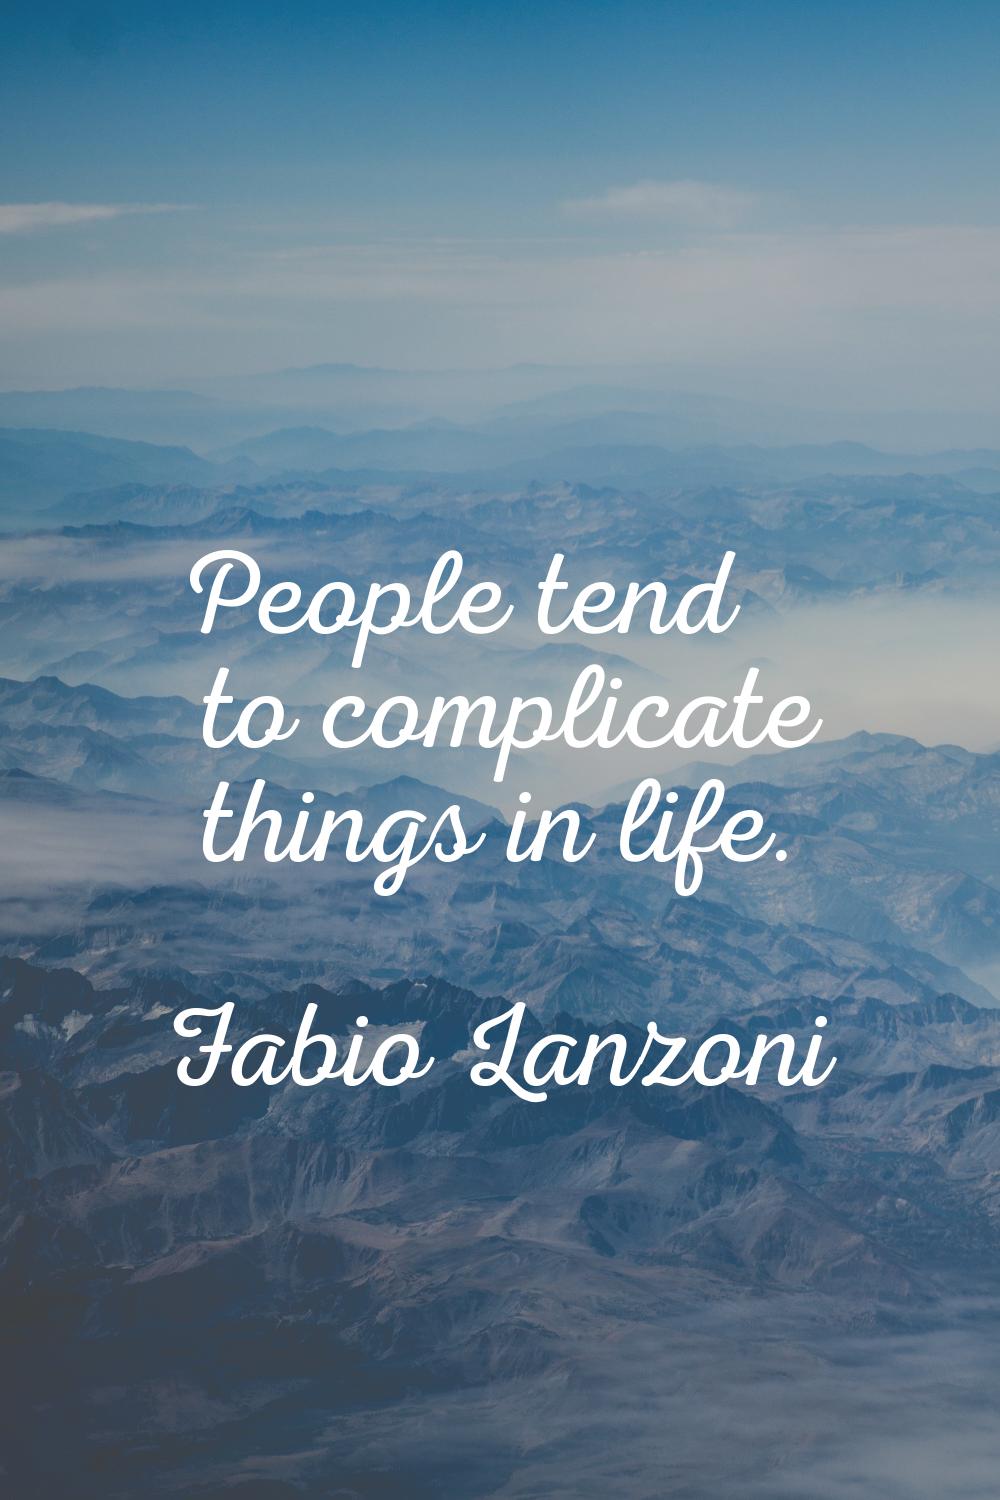 People tend to complicate things in life.